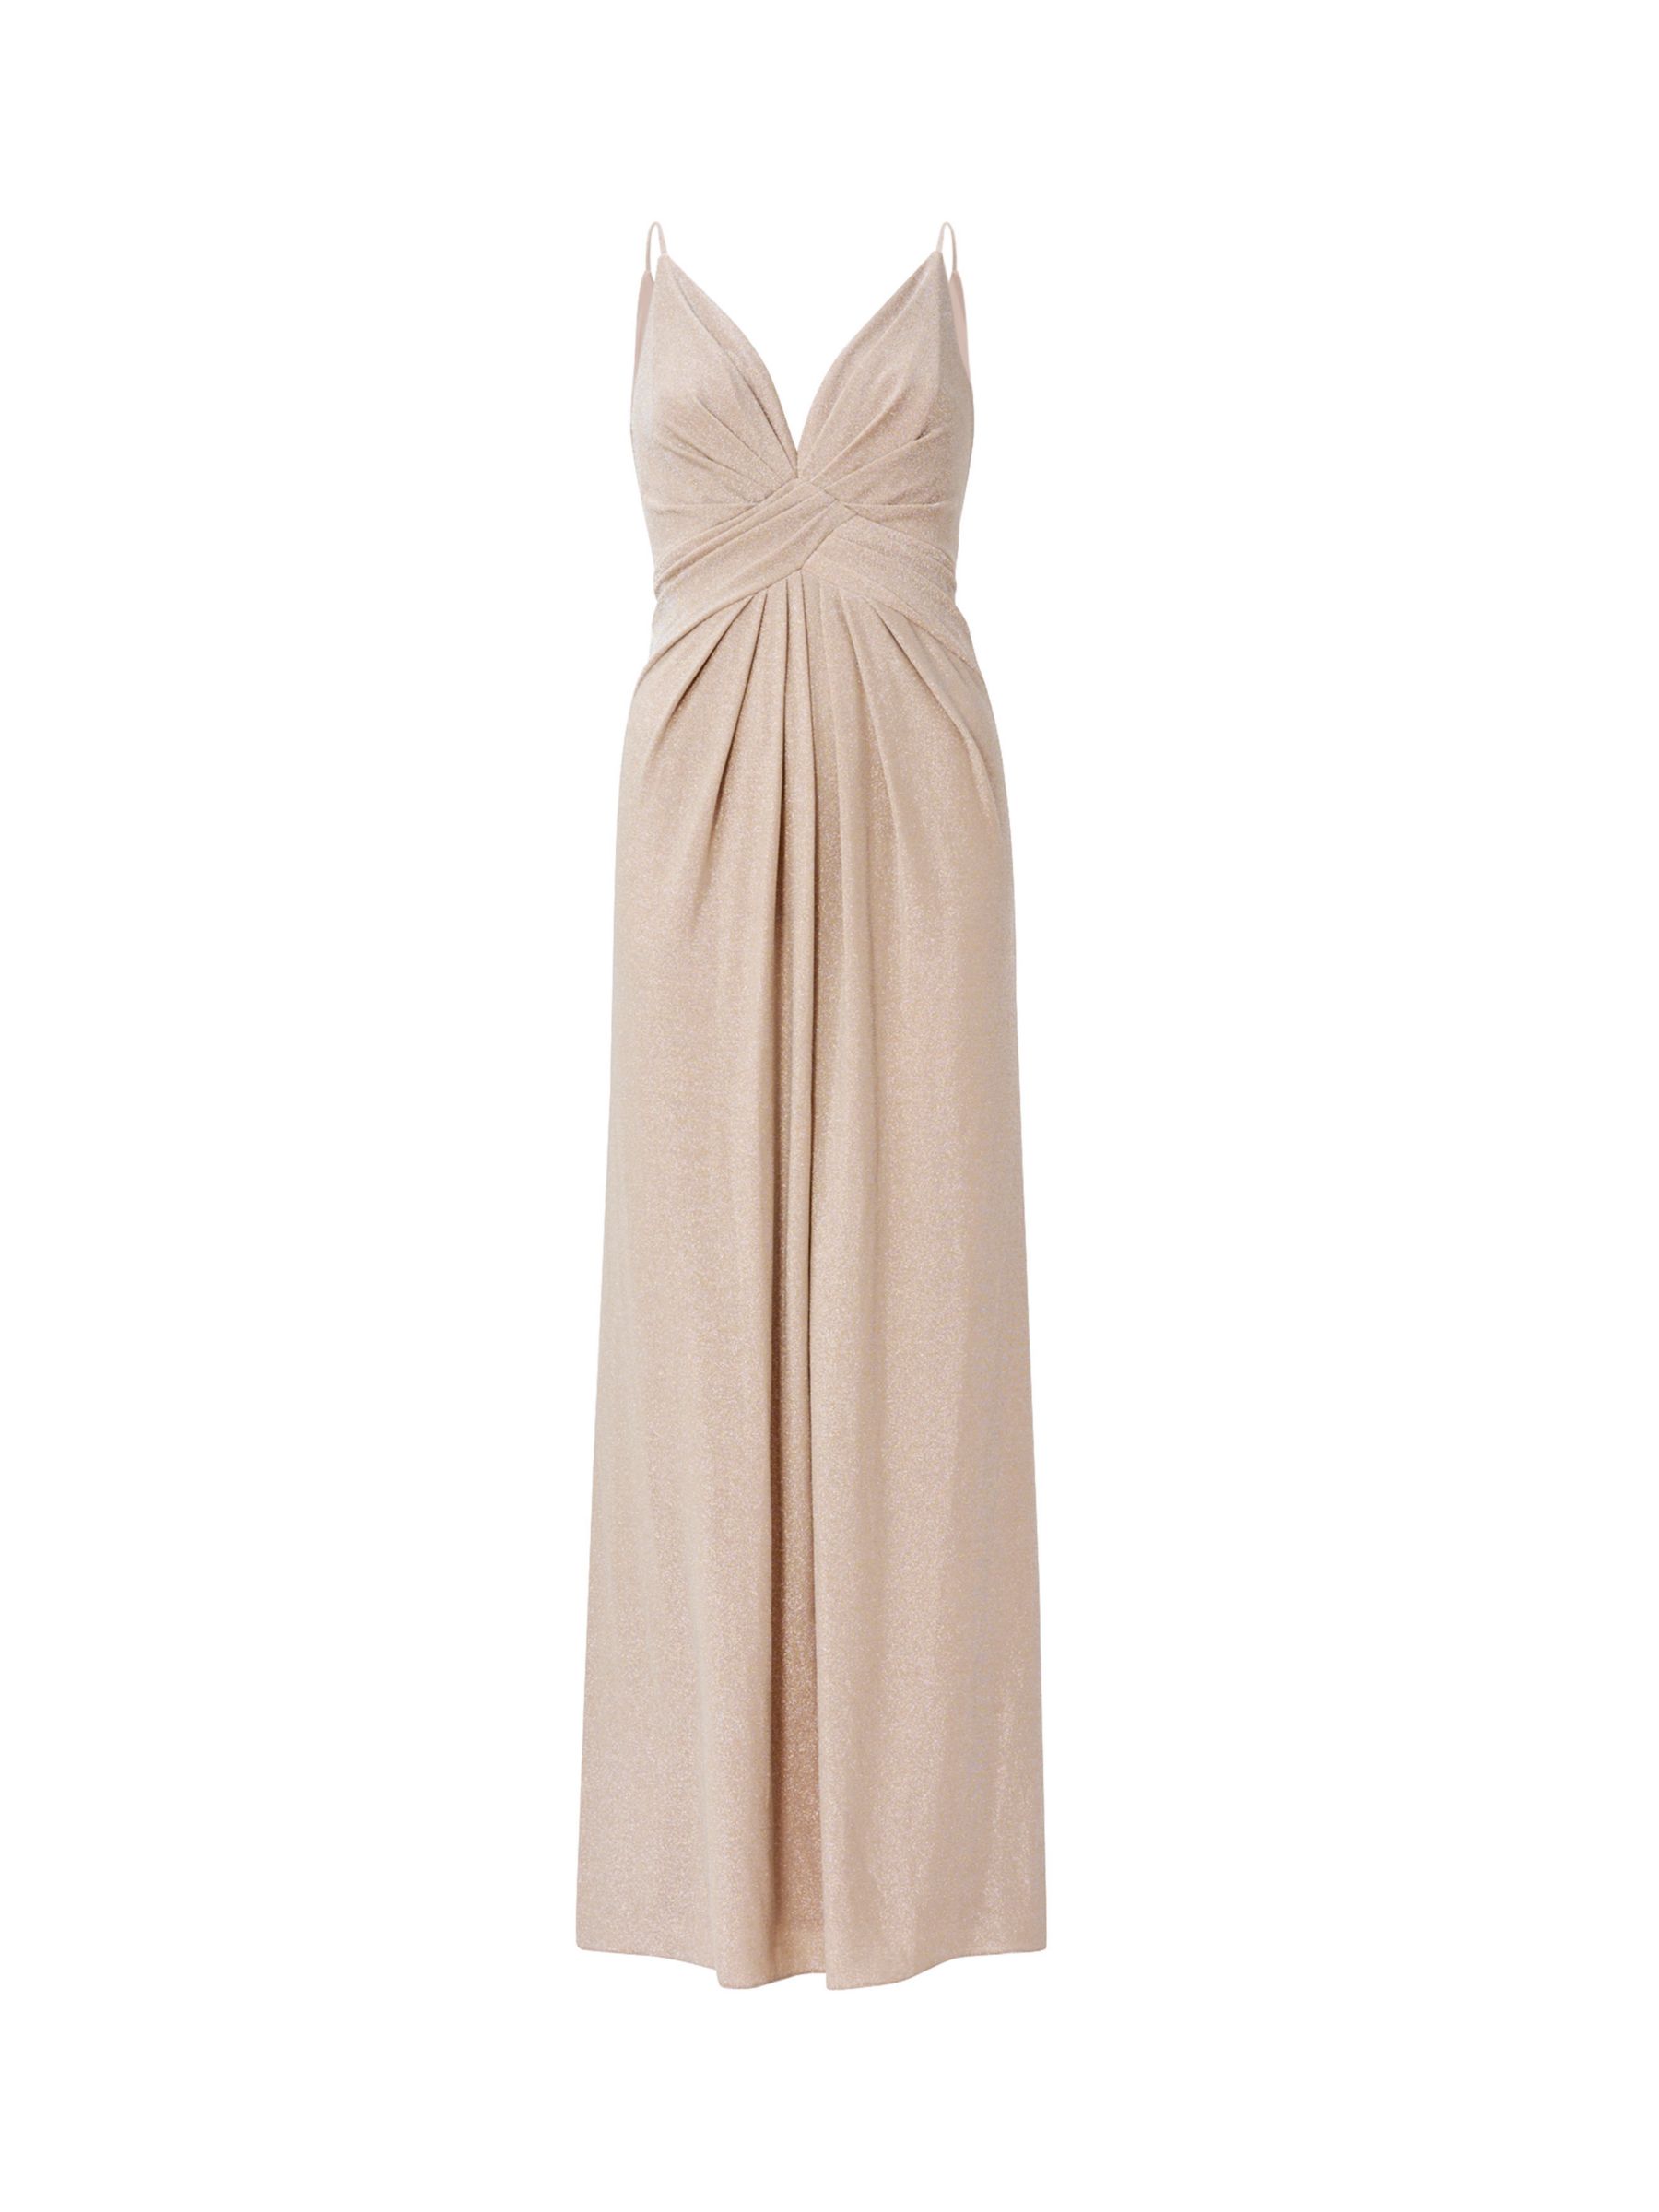 Buy Adrianna Papell Metallic Jersey Maxi Dress, Champagne Online at johnlewis.com